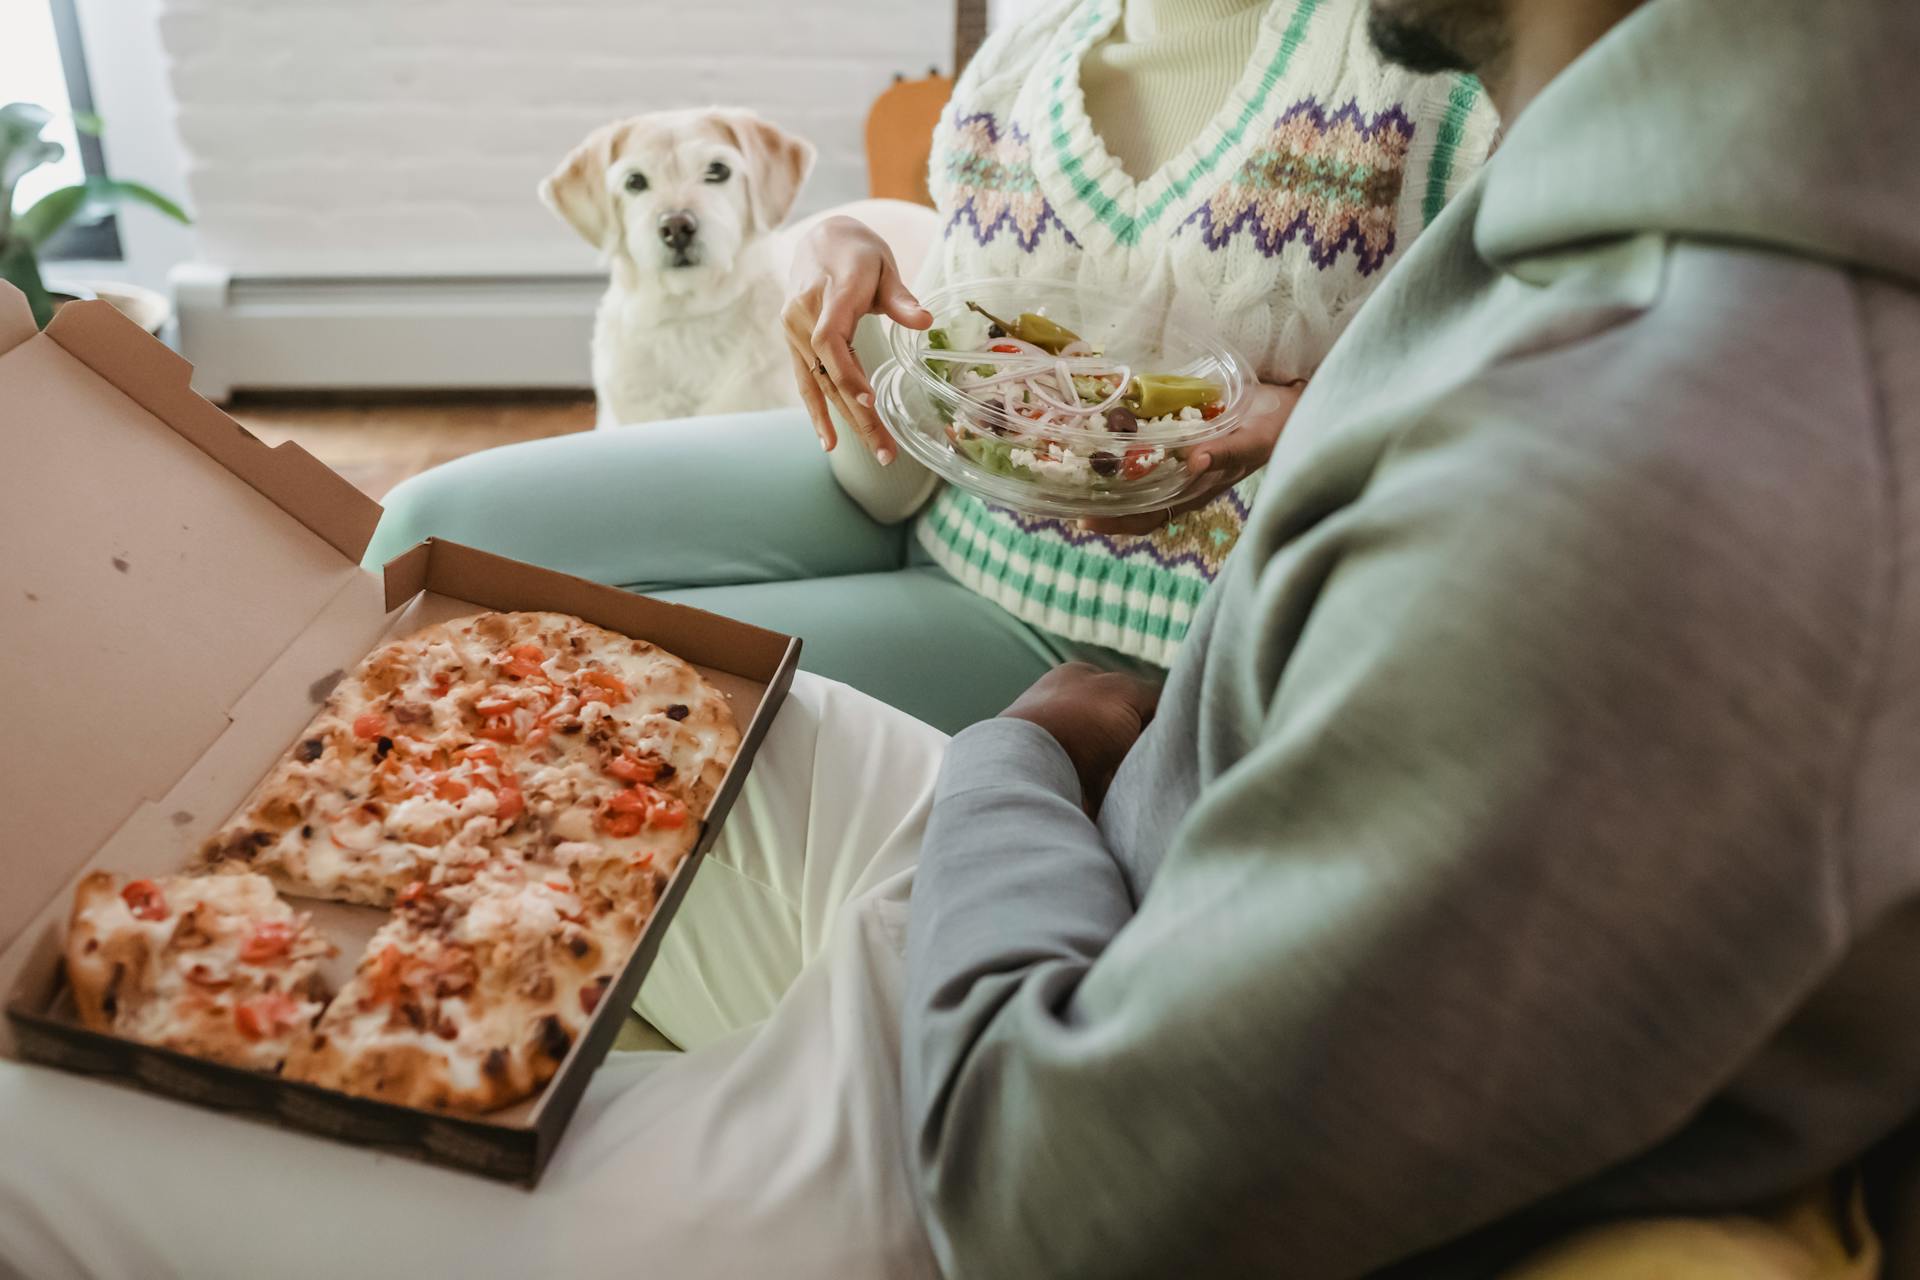 A dog sitting by a man and a woman eating salad and pizza